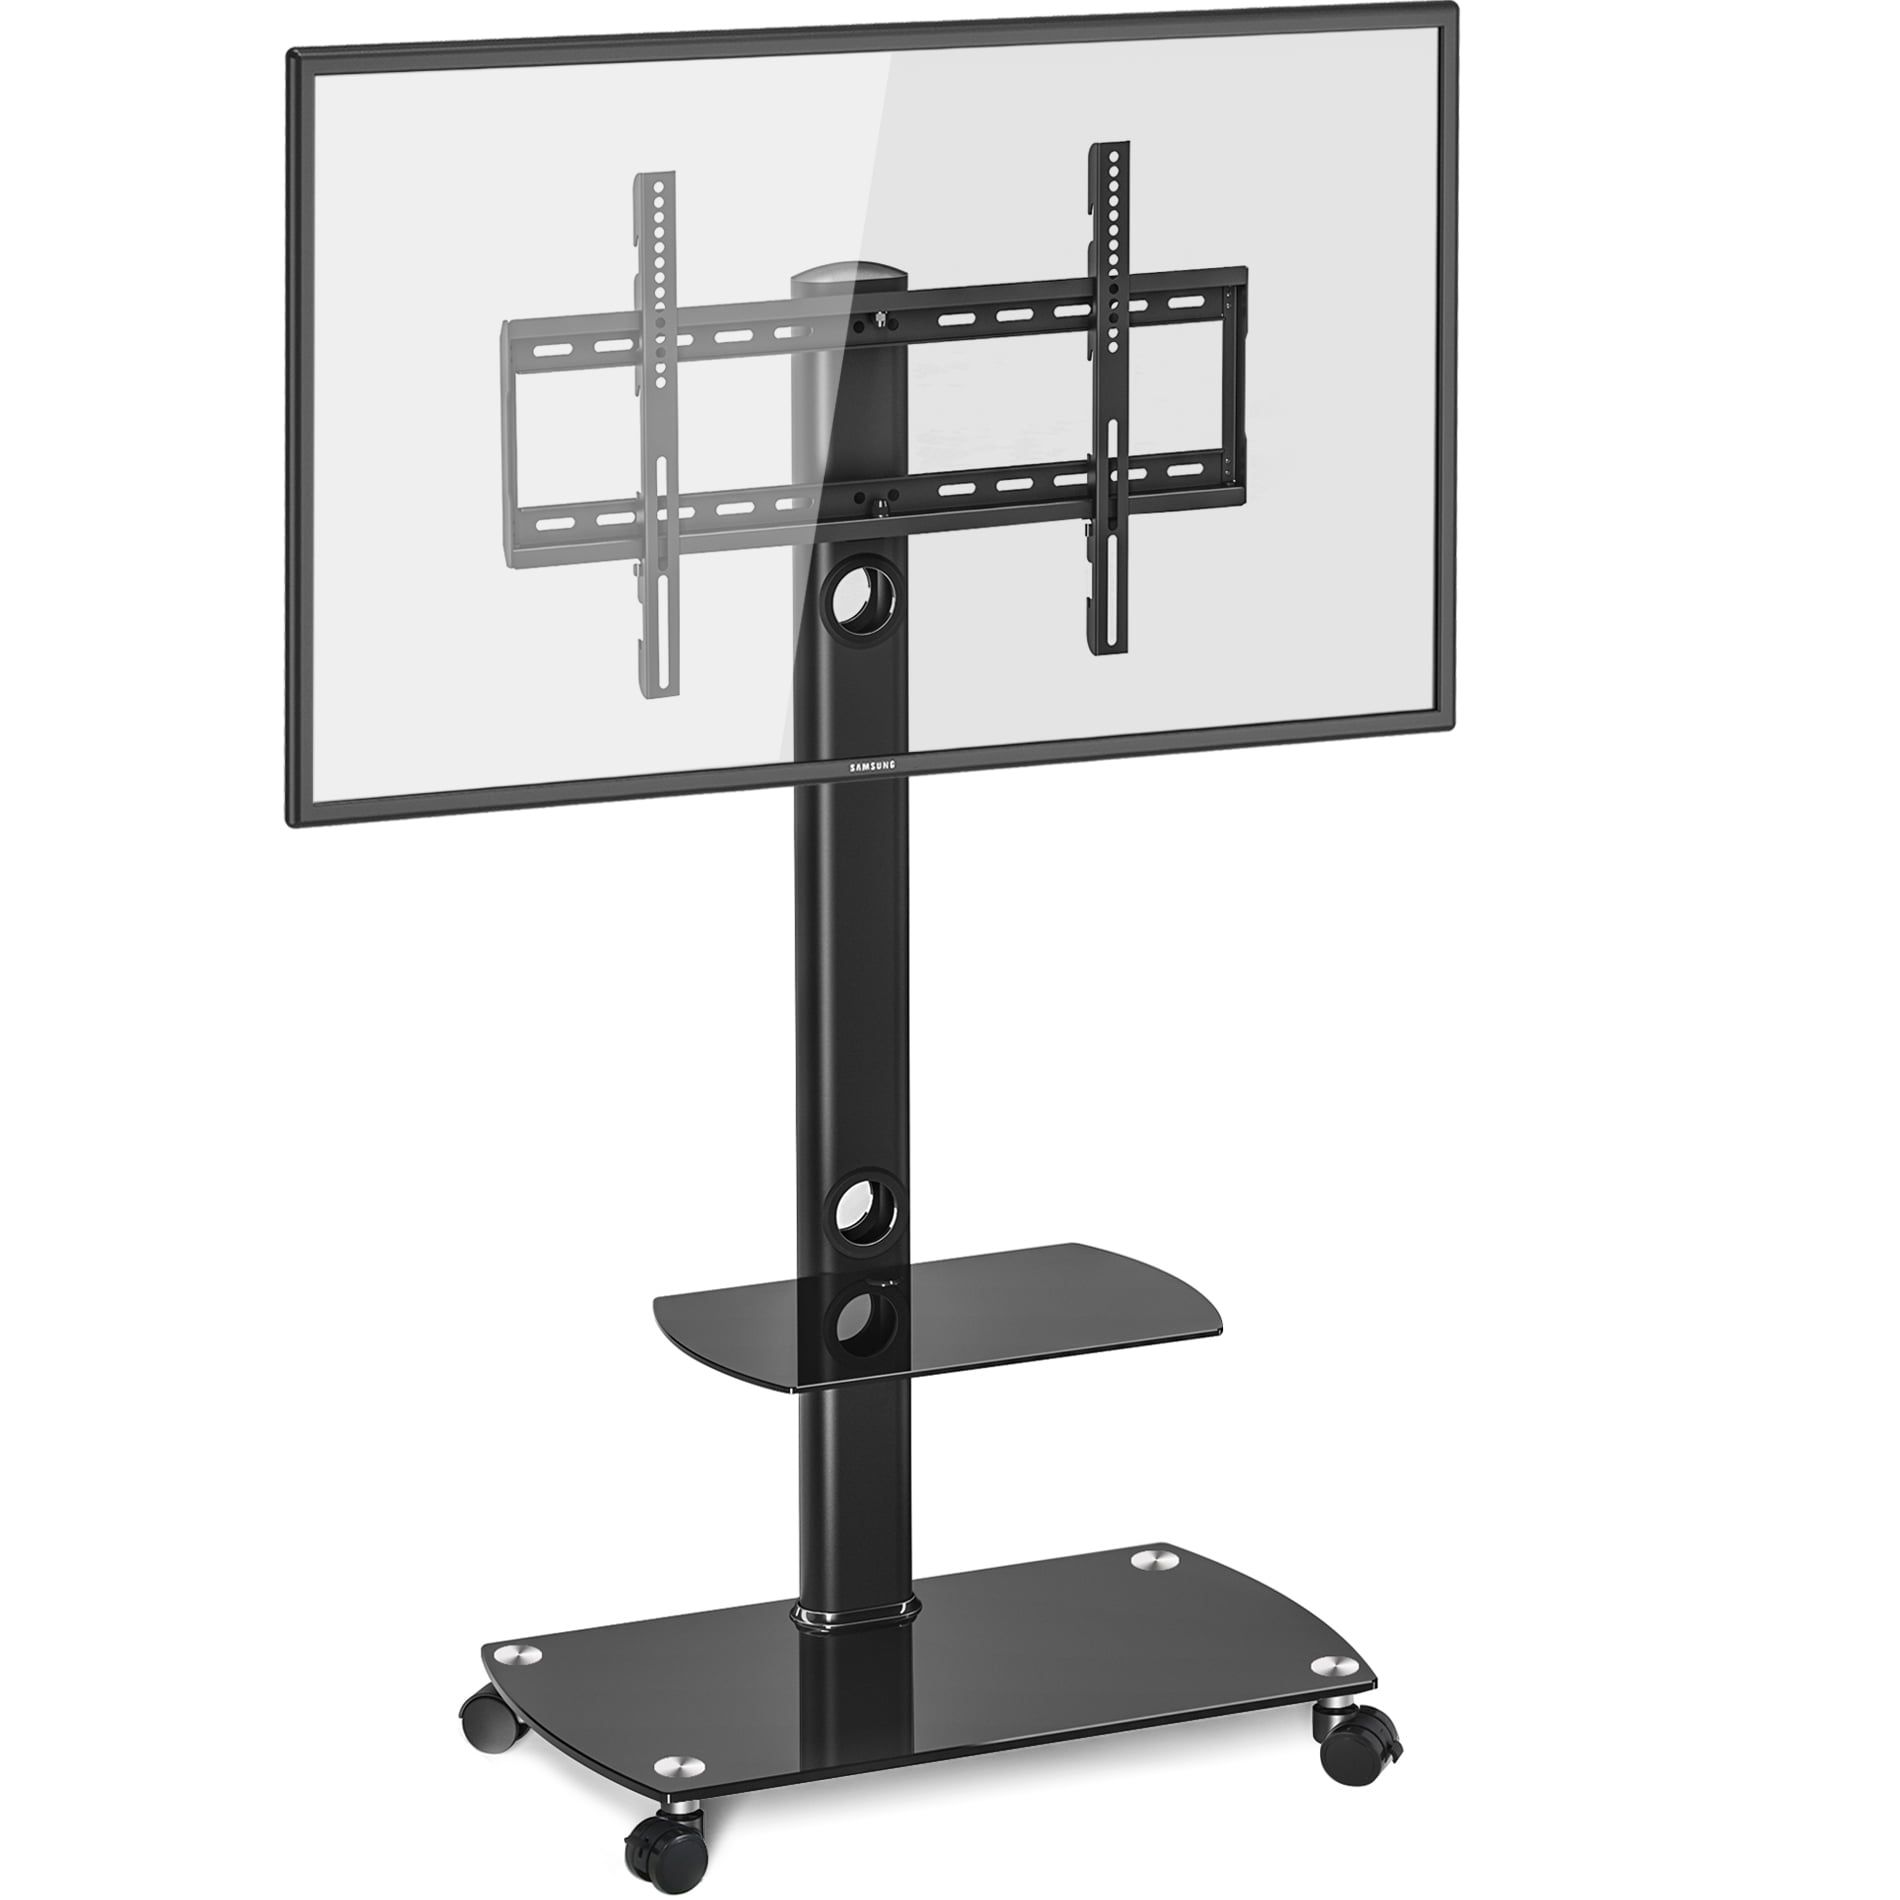 Mobile Floor Tv Stand Trolley Cart With Mount Display For 32 To 65 Inch Regarding Mobile Tilt Rolling Tv Stands (View 16 of 20)